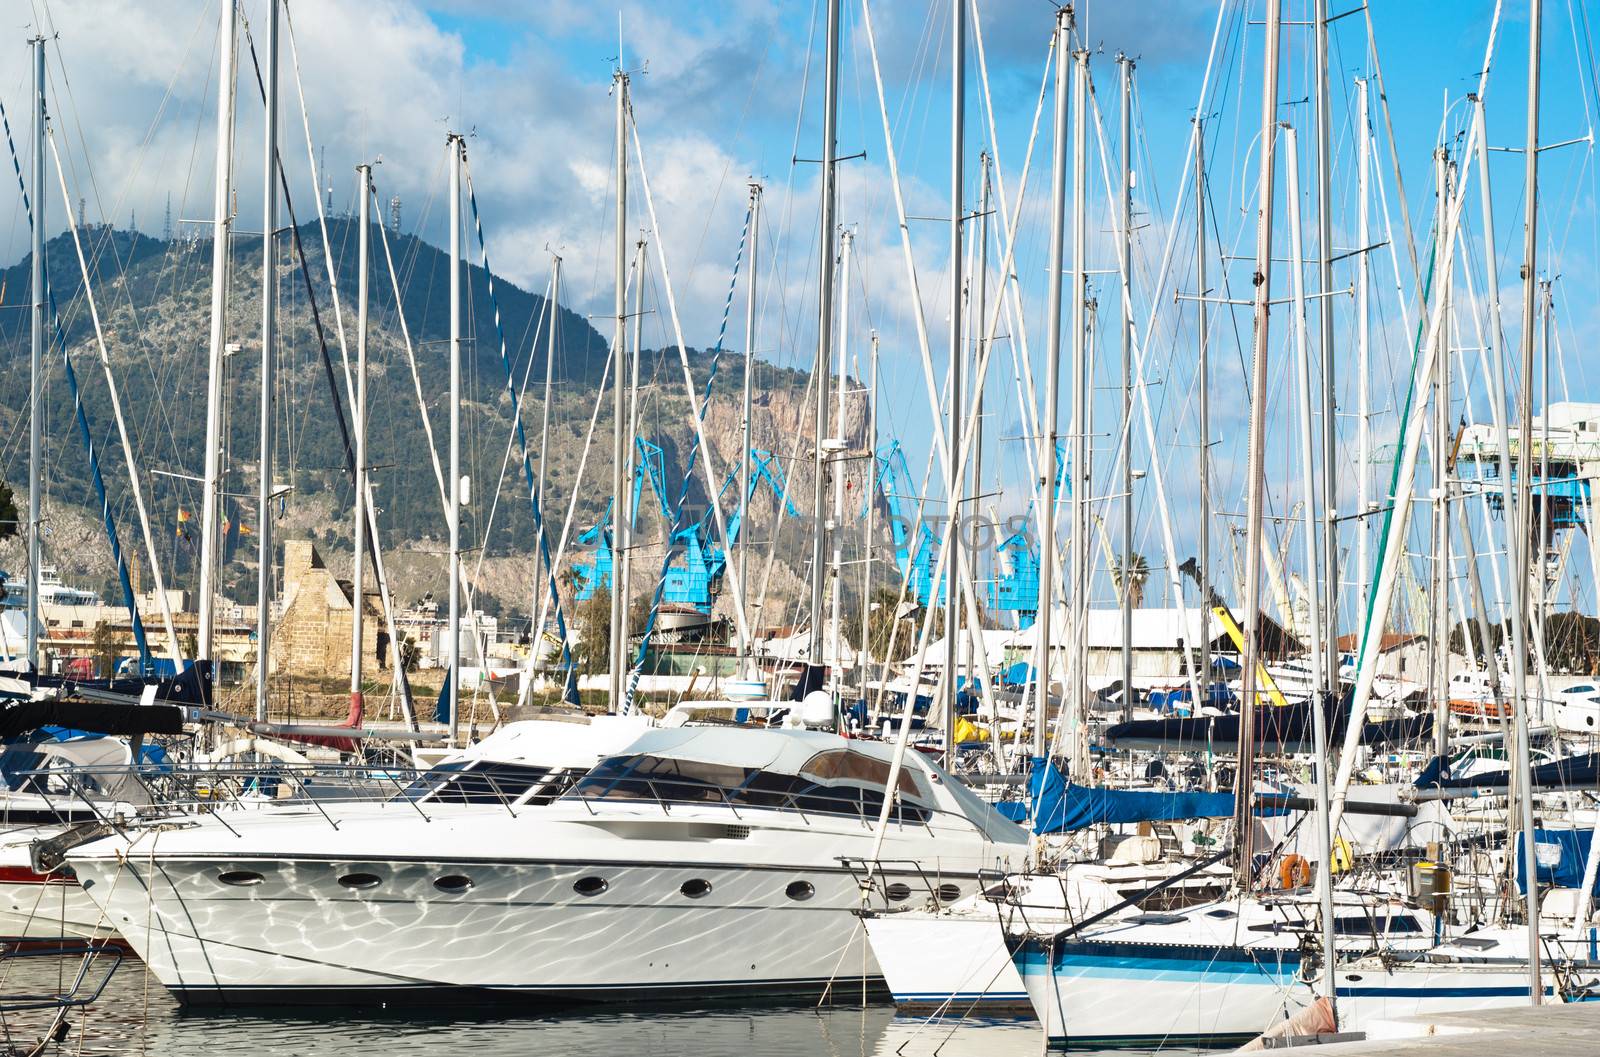 yachts and boats in old port in Palermo called Cala, Italy